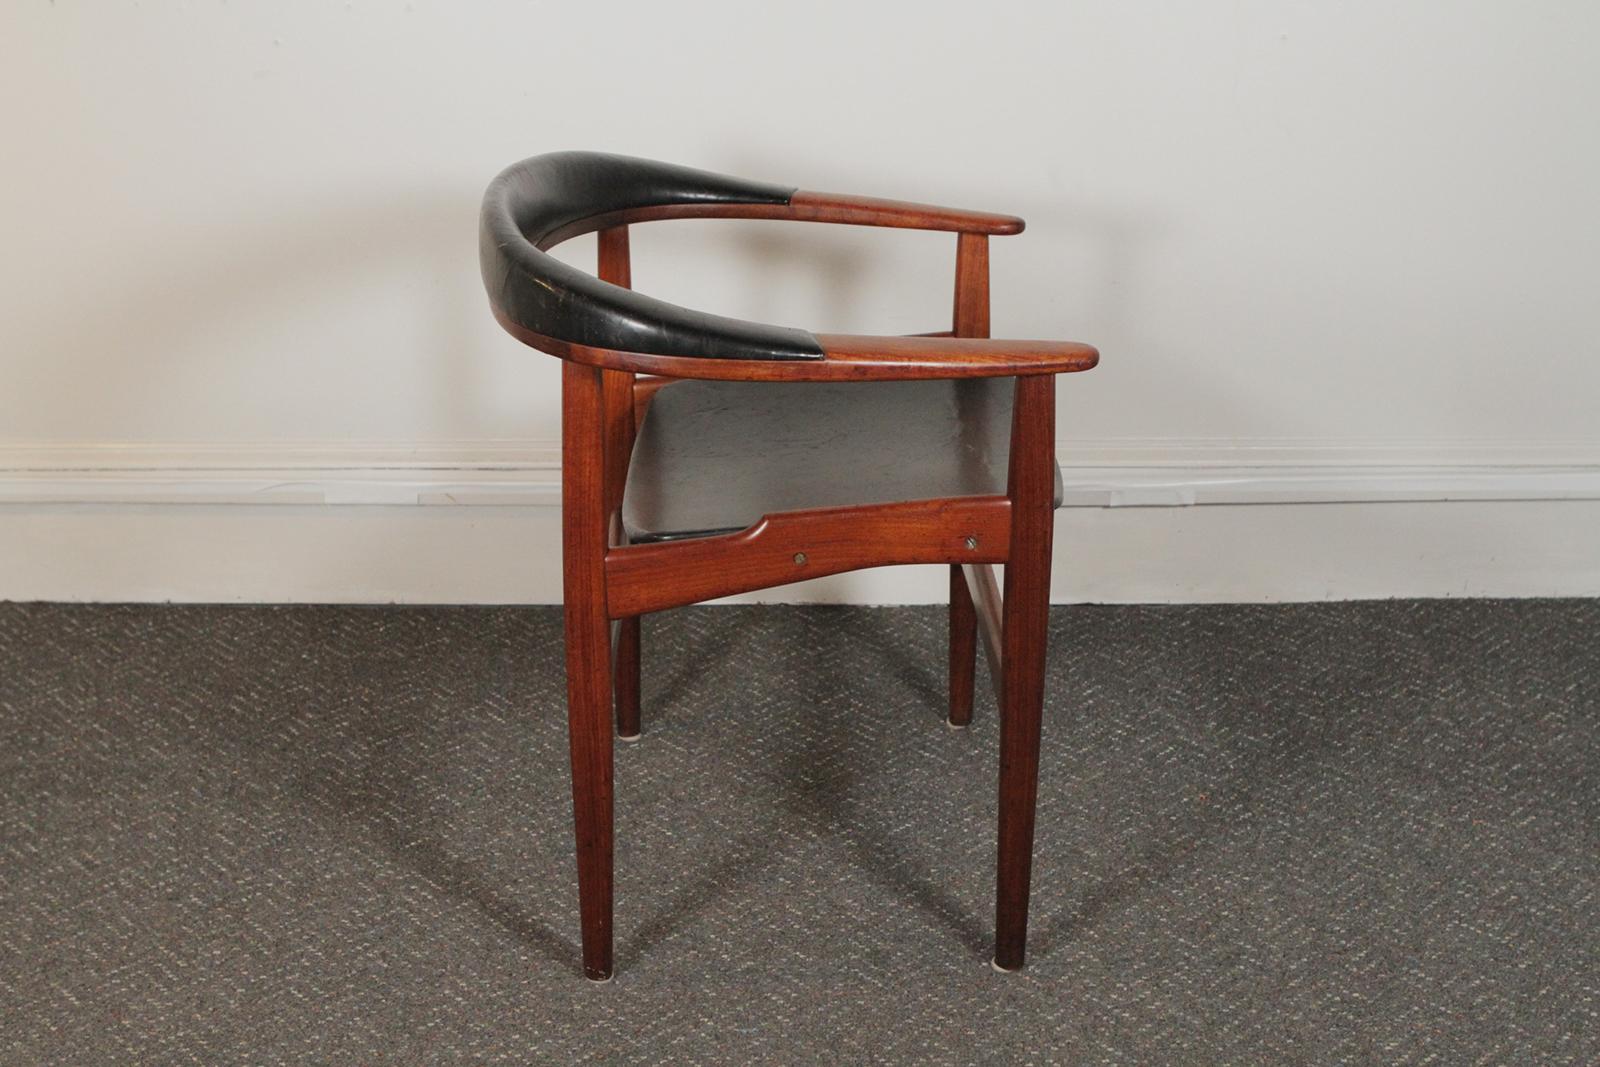 Arne Hovmand-Olsen for Jutex, DK, circa 1957 (Teak + original leather) the rounded back with leather upholstery. The leather is original showing signs of use and the frame is in excellent condition. The chair is signed on the underside of the